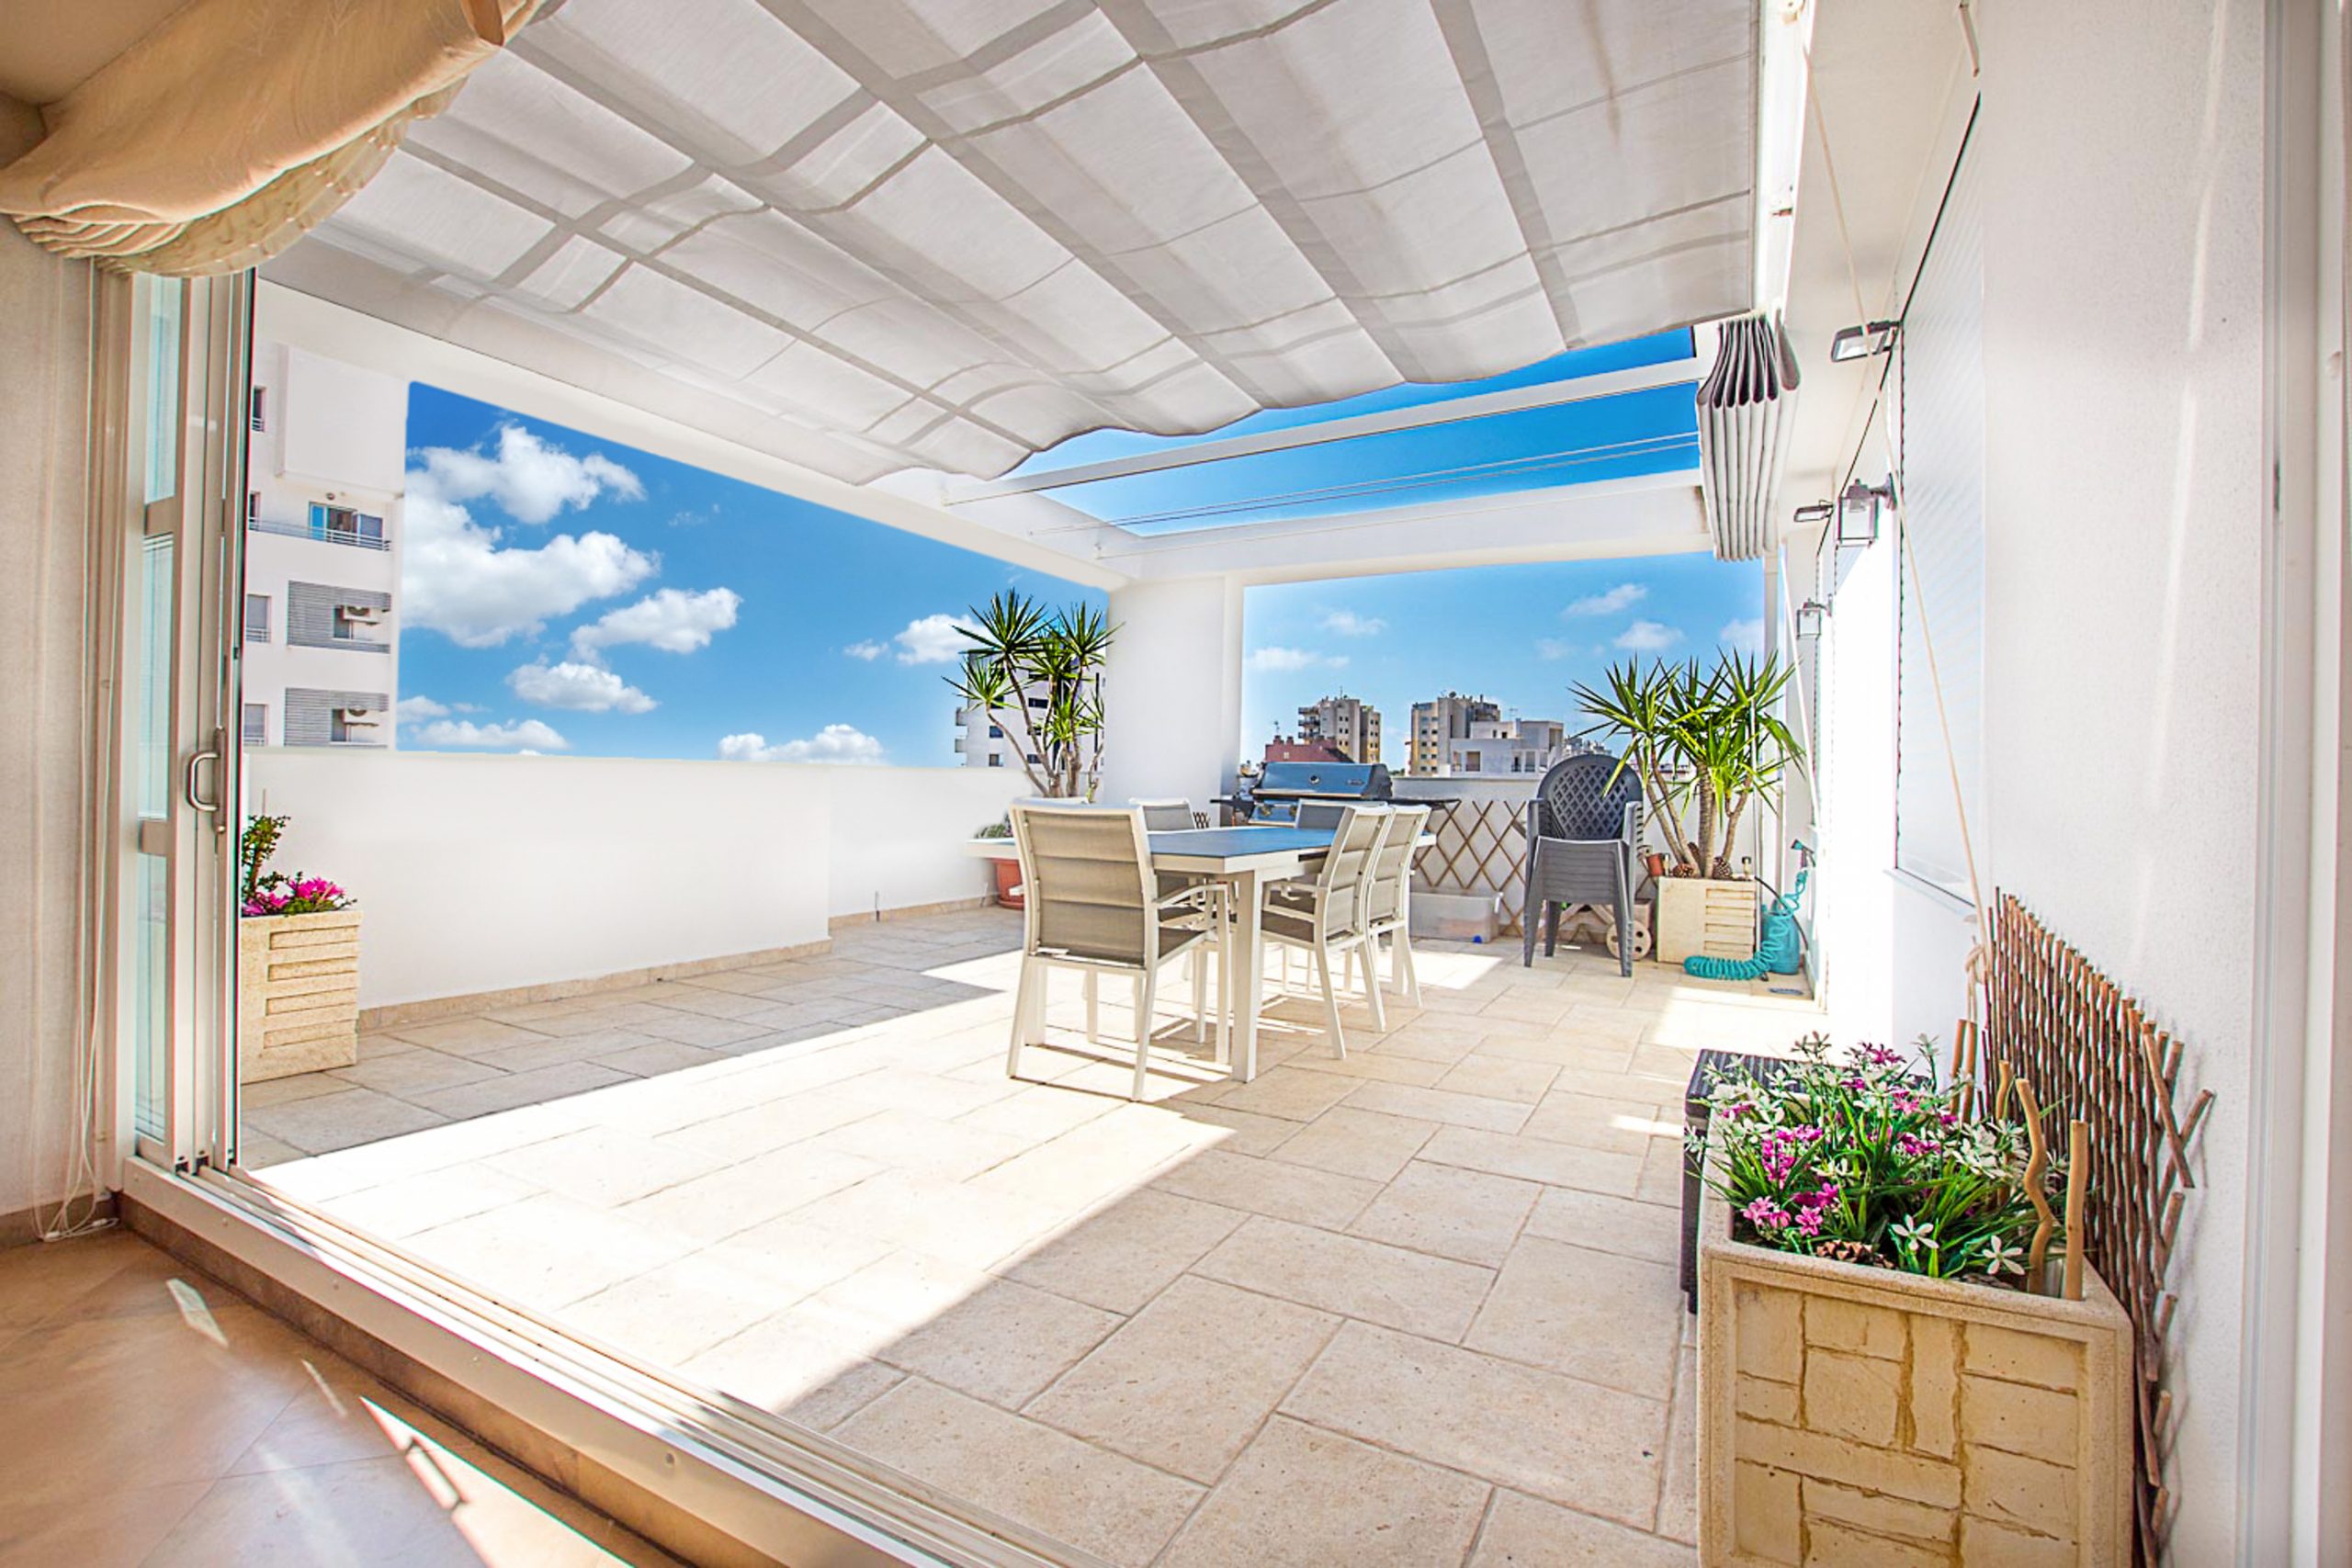 Beautiful outdoor space with panoramic views, perfect for entertaining or enjoying the scenery